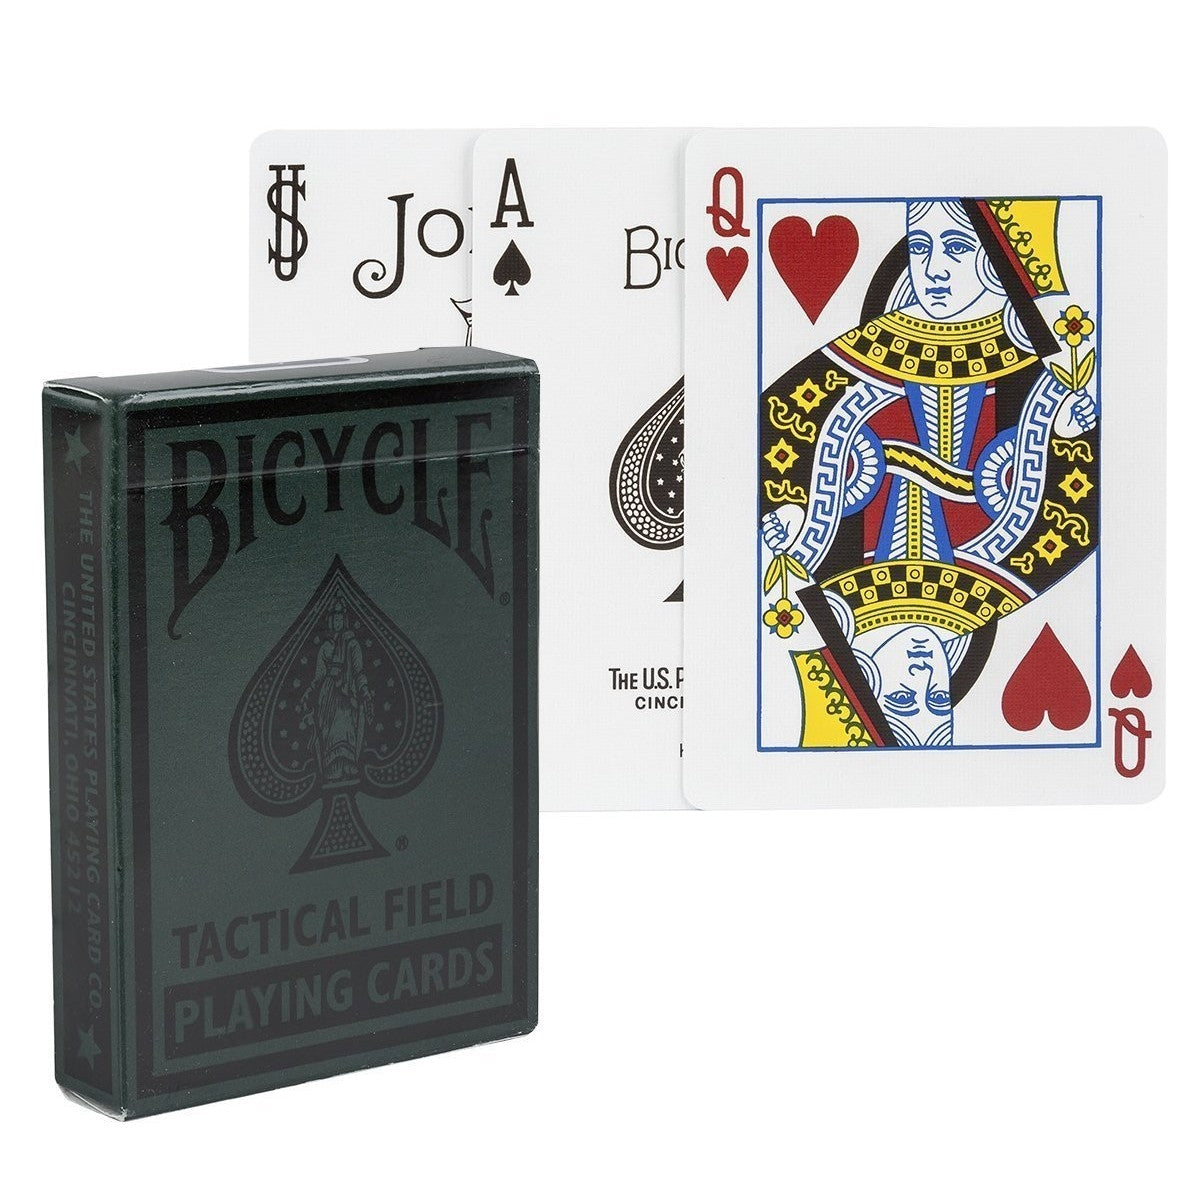 Bicycle Cards- Tactical Field